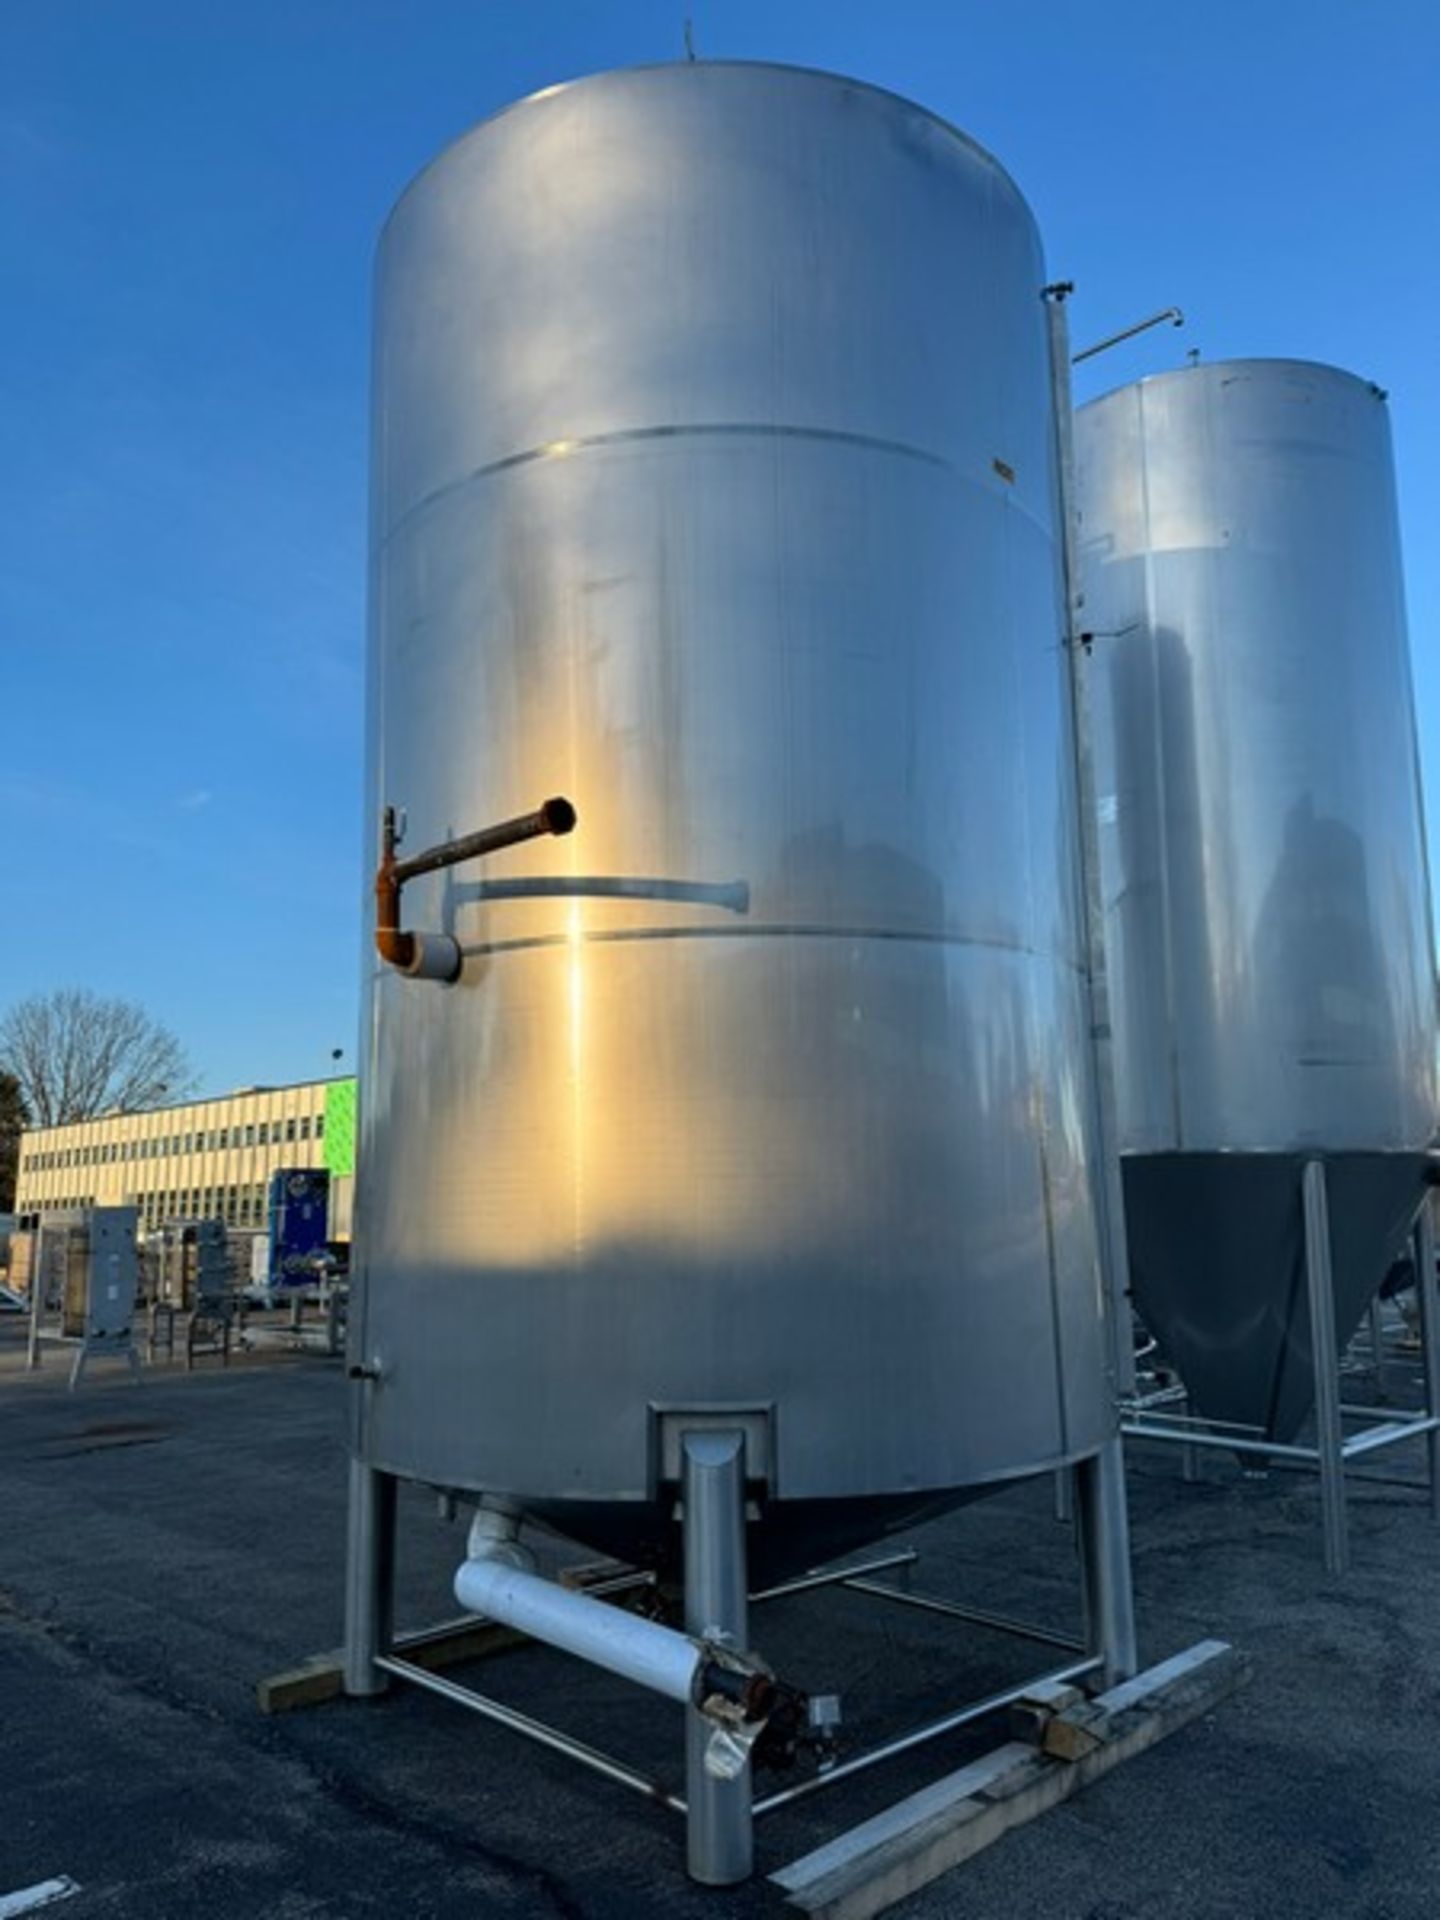 2012 Specific Mechanical Systems 200 BBL Capacity S/S Cold Liquor Tank, S/N RMP-136-12-300, with S/S - Bild 3 aus 10